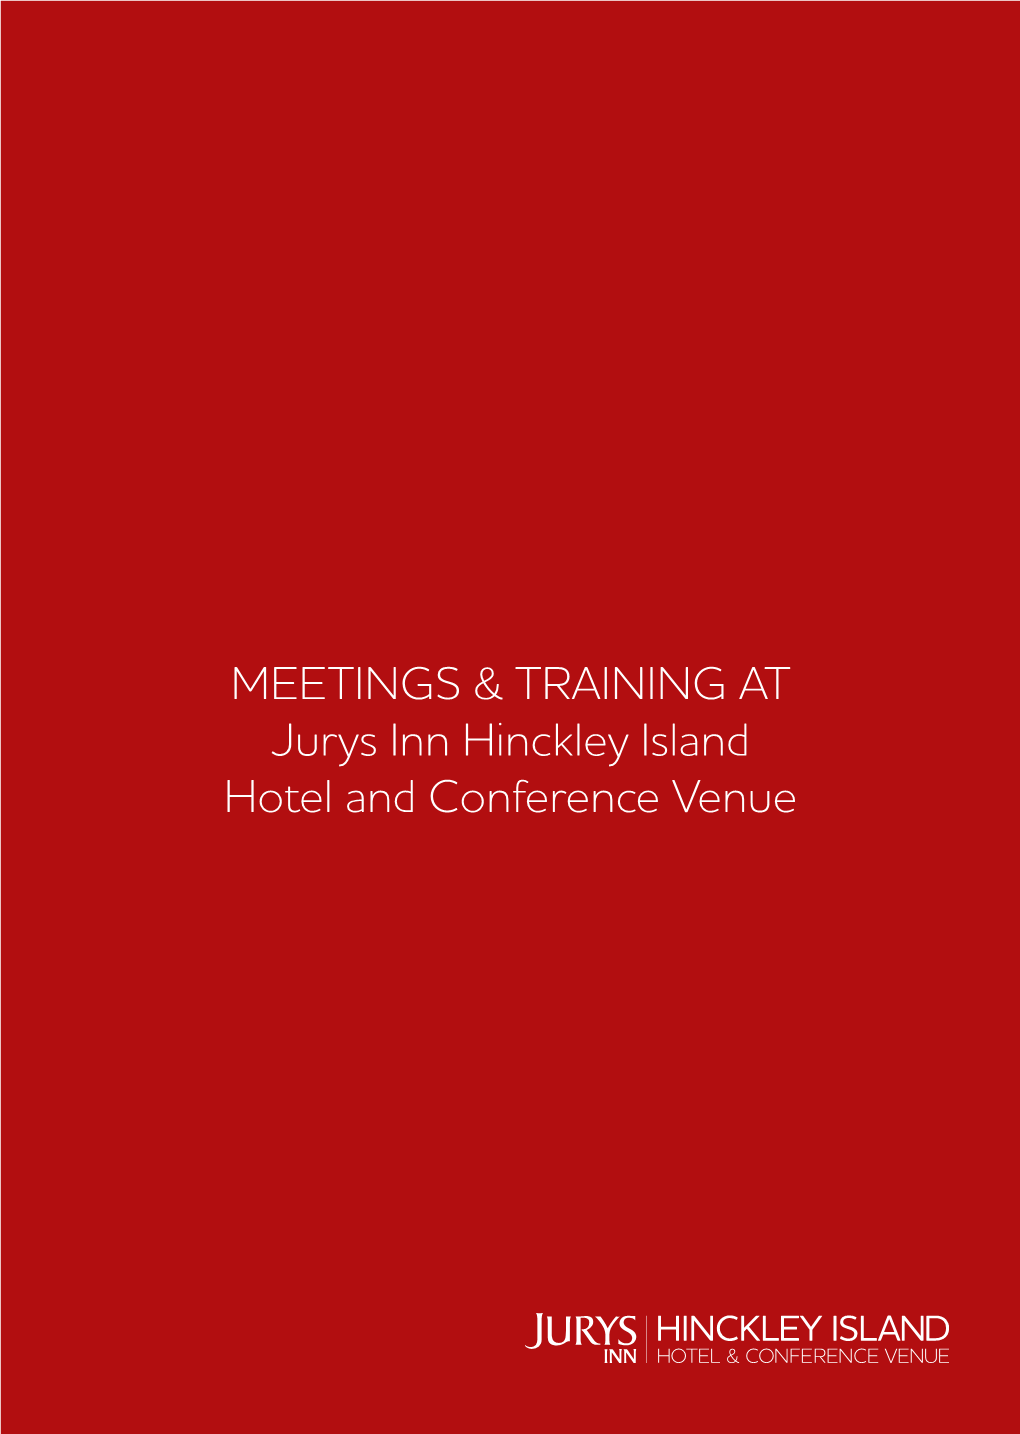 Jurys Inn Hinckley Island Hotel and Conference Venue Training Suite